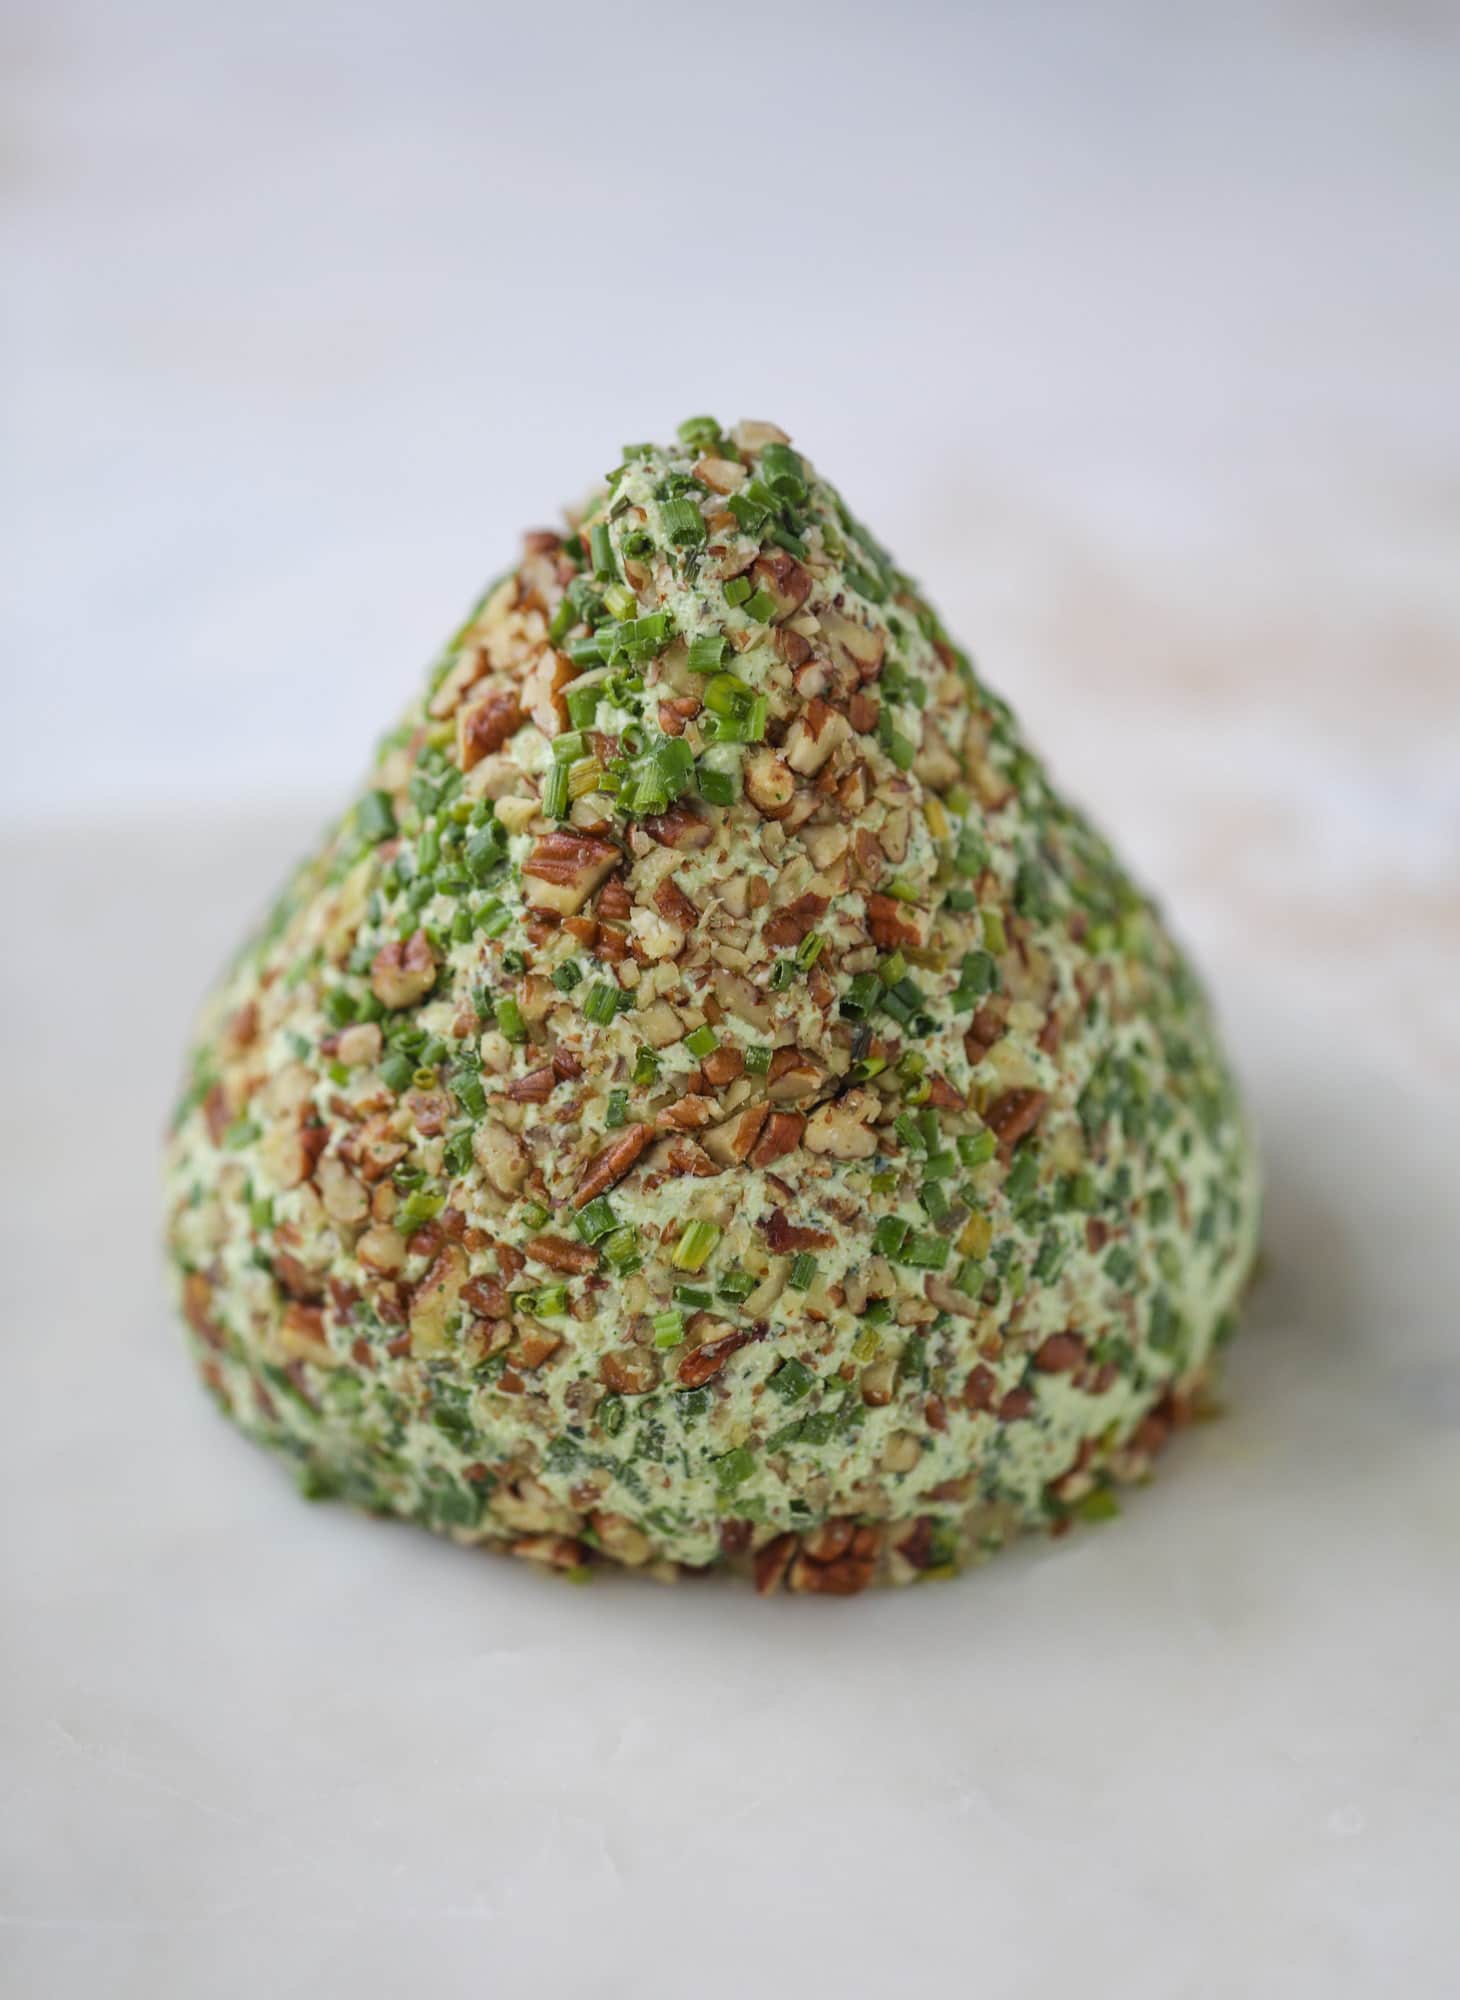 This green goddess cheese ball is the perfect party snack! You can make it ahead of time and shape it into a cute tree for a festive look. Serve it with crispy crackers and pita chips! I howsweeteats.com #greengoddess #cheeseball